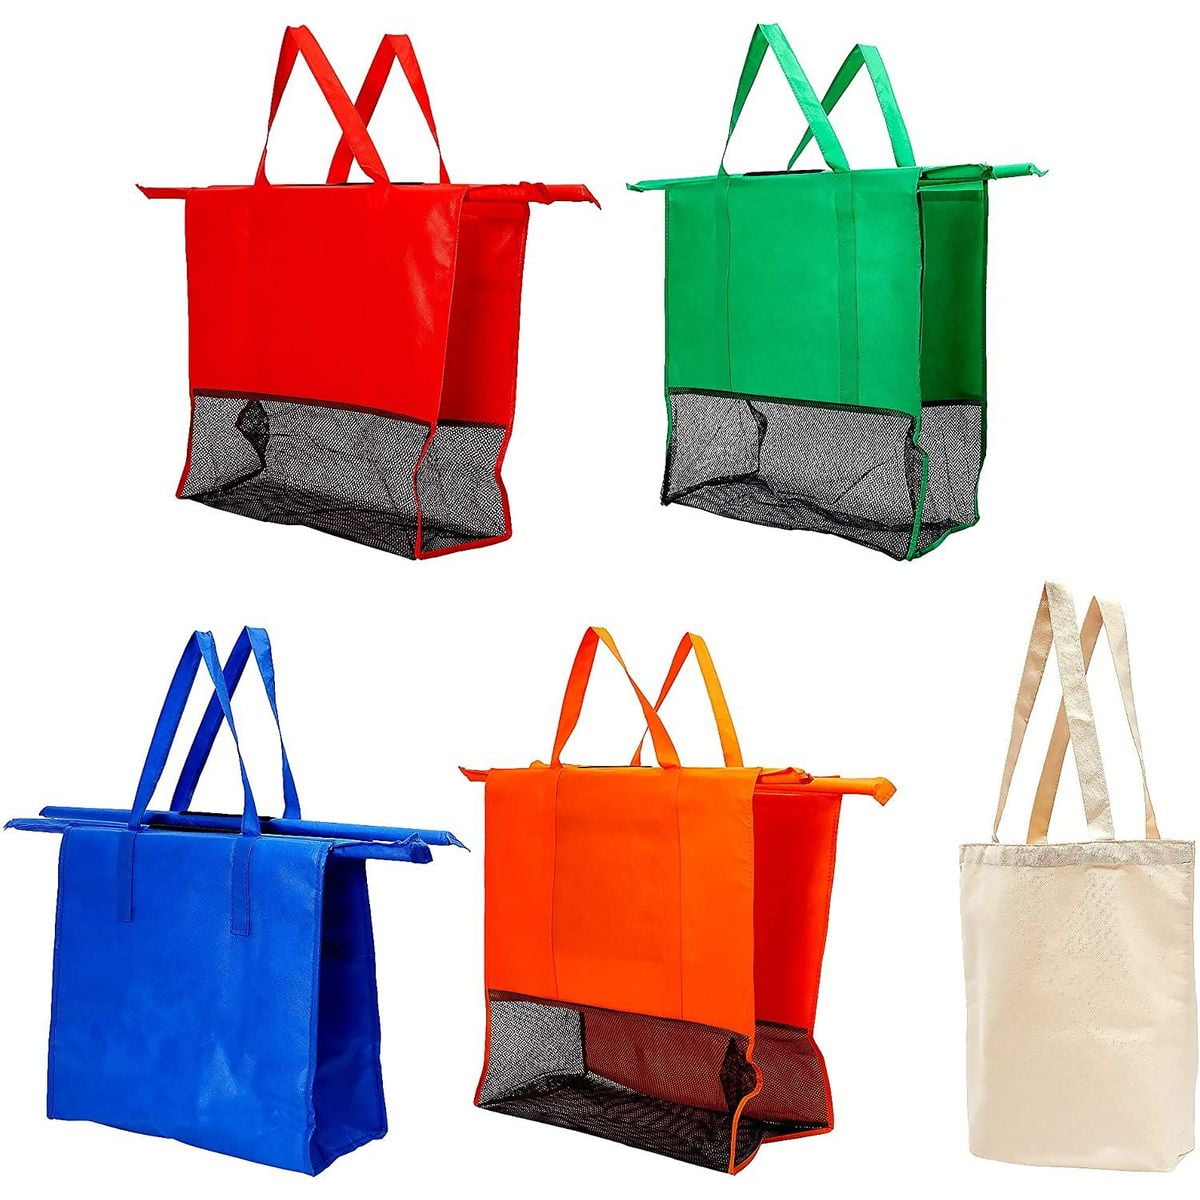 Details about   Animals Dog Nylon Folding Eco Reusable Shopping Bags 